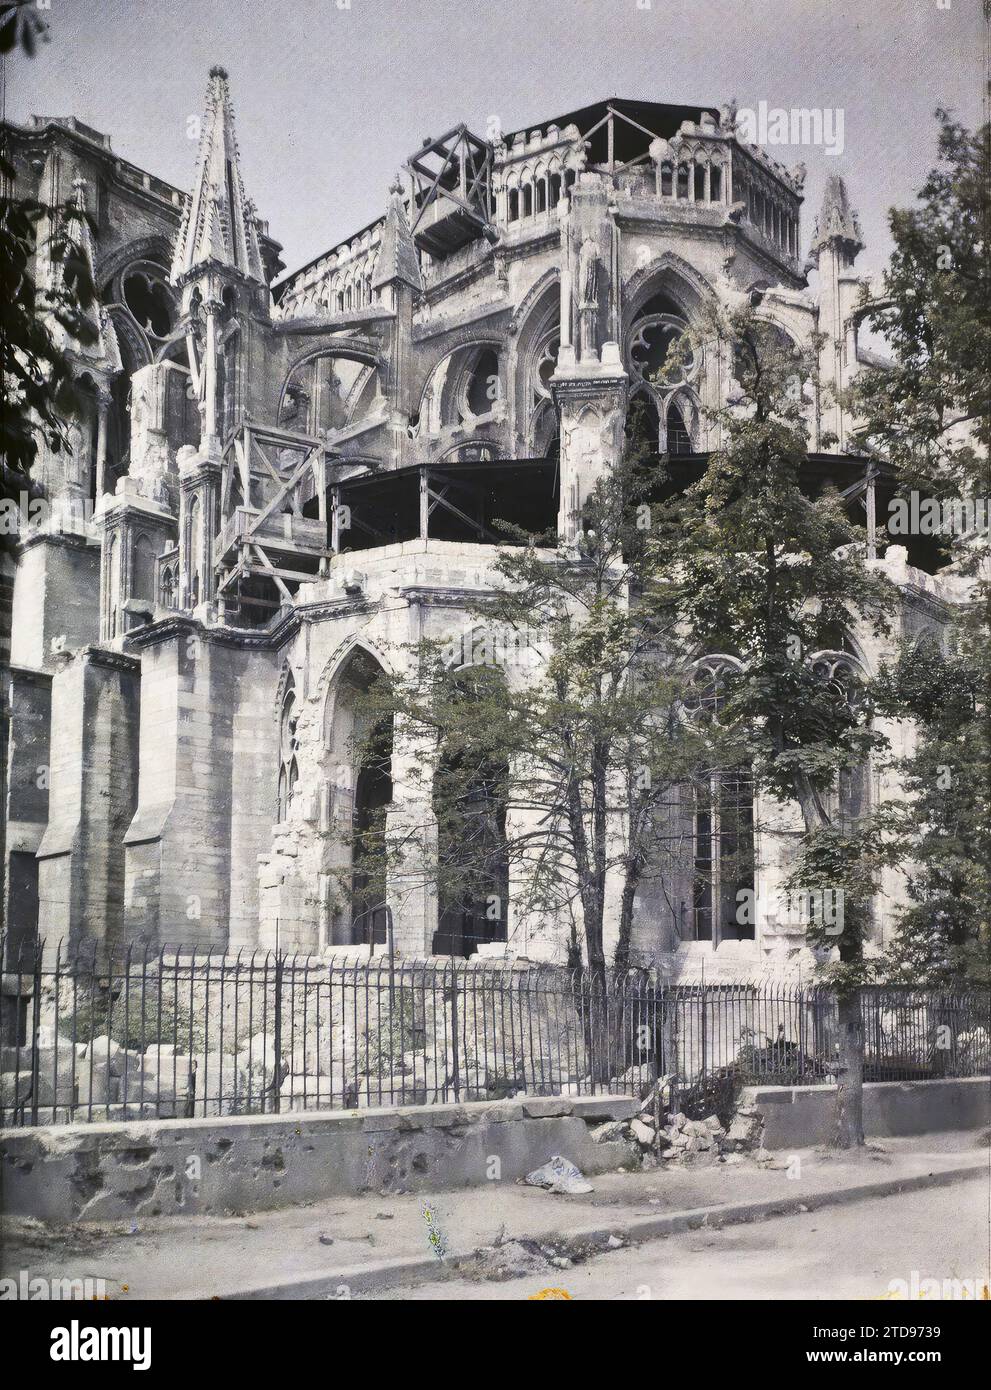 Reims, Marne, Champagne, France, Habitat, Architecture, First World War, Art, Church, Scaffolding, shoring, Works, Ruins, Reconstructions, Middle Ages, Post-war, Religious architecture, France, Reims, The Apside Cathedral, Reims, 25/08/1920 - 25/08/1920, Léon, Auguste, photographer, 1920 - Reims - Auguste Léon - (25-27 August), Autochrome, photo, Glass, Autochrome, photo, Positive Stock Photo